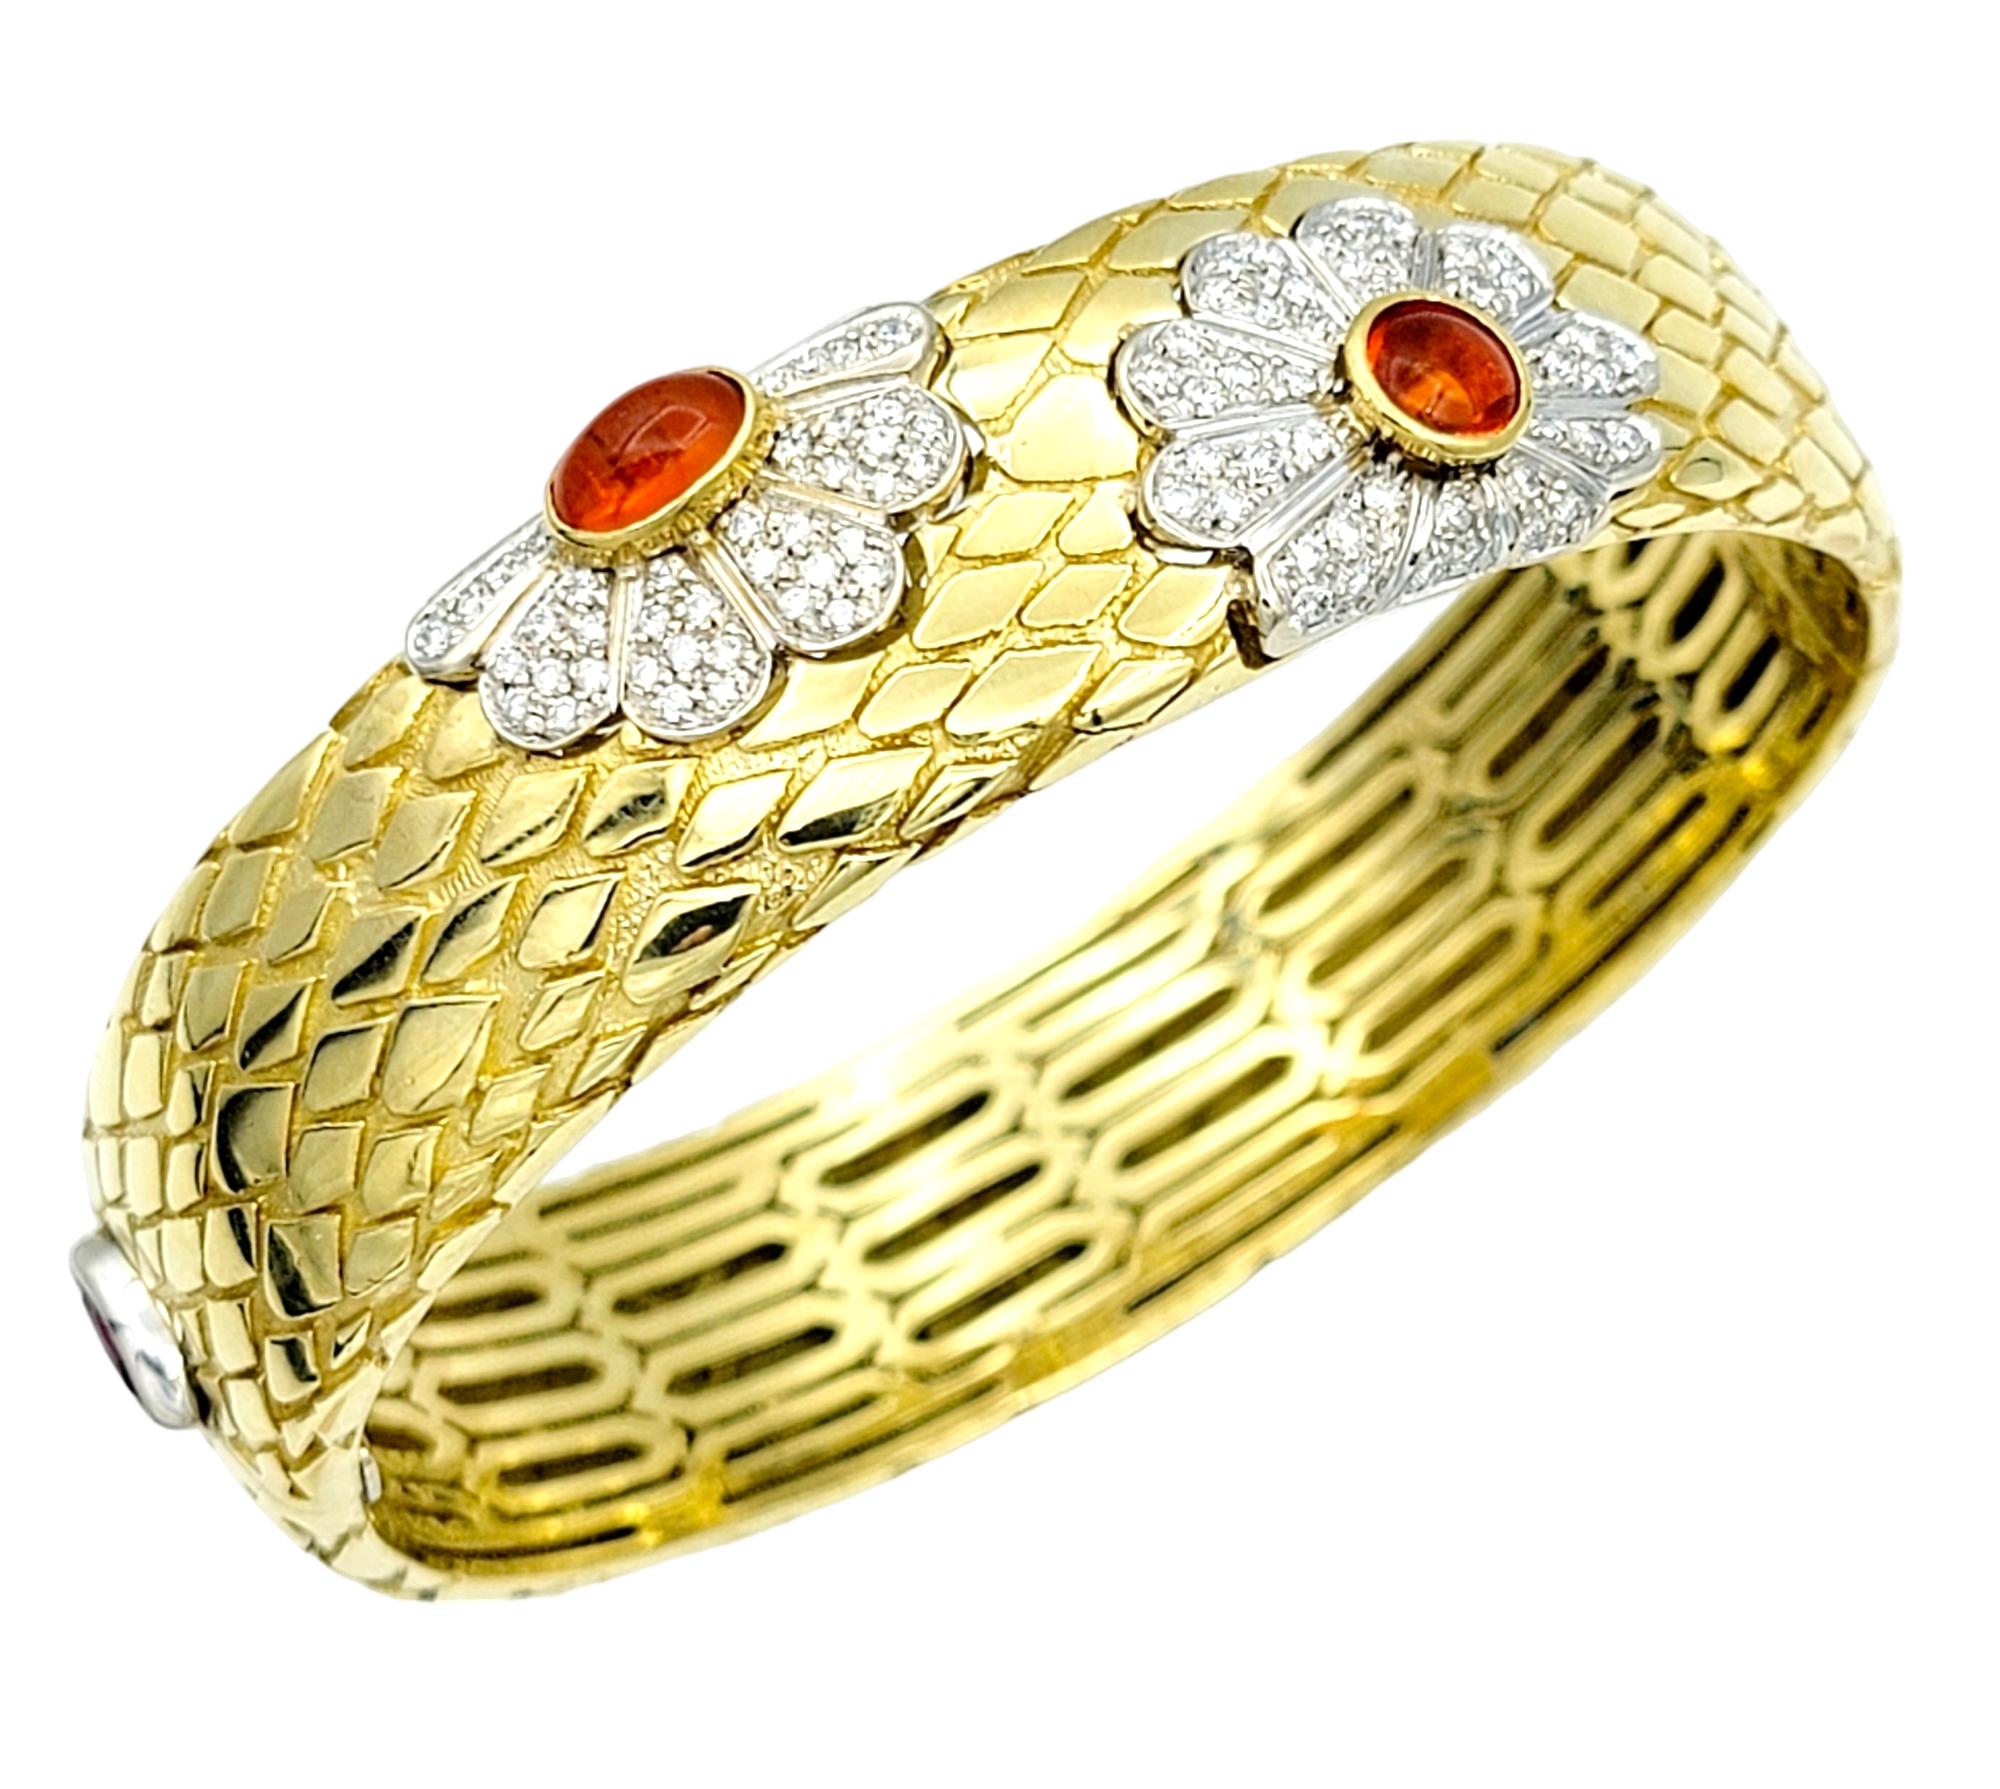 Roberto Coin Gold Snakeskin Bangle Bracelet with Fire Opal and Diamond Flowers